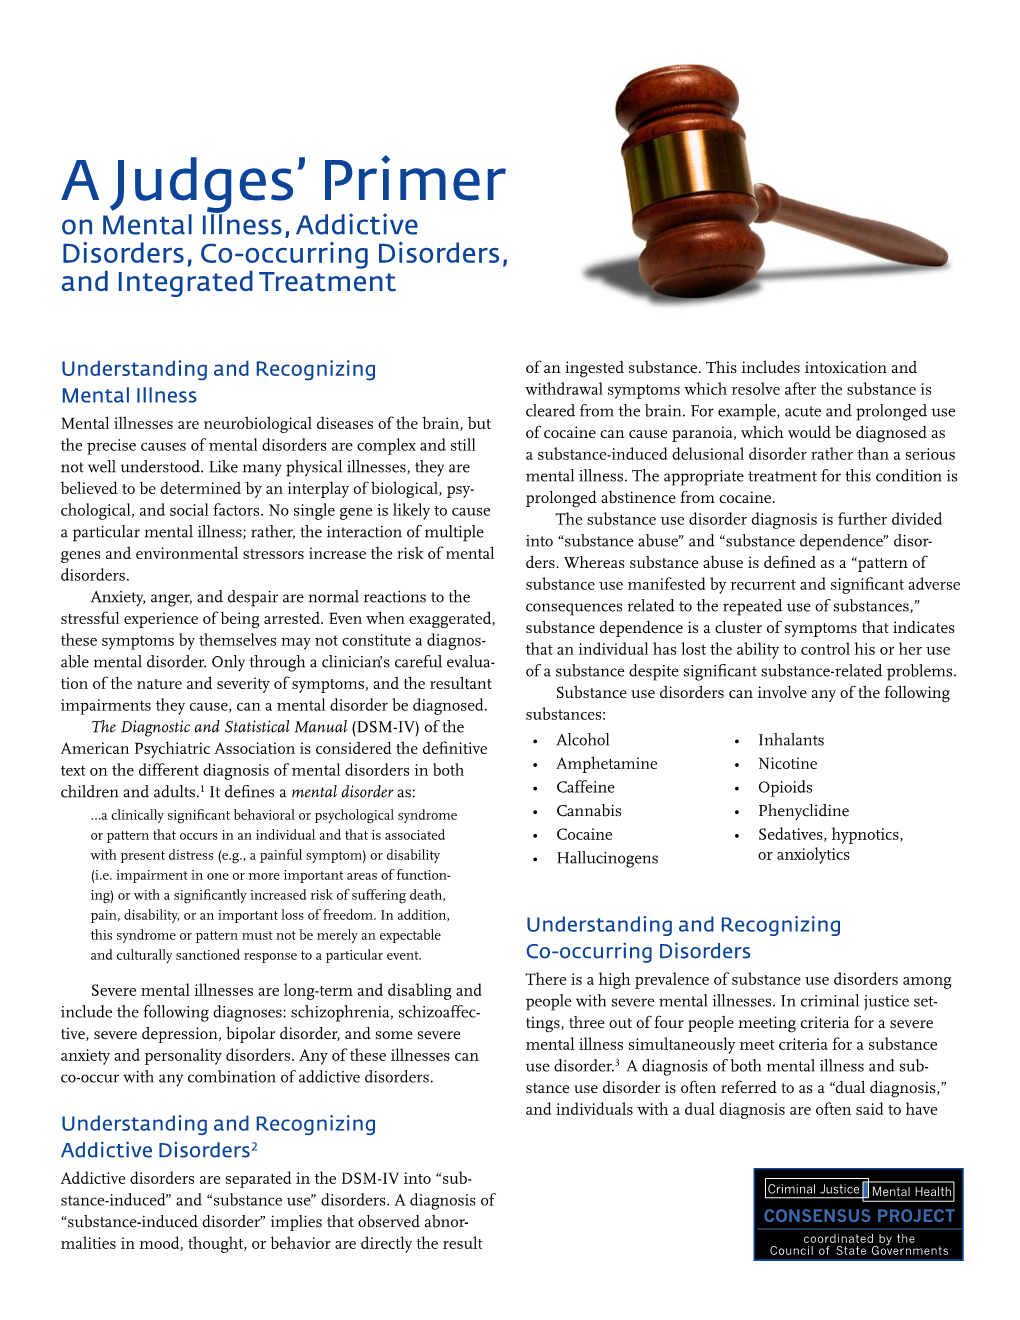 Judges' Primer on Mental Illness, Addictive Disorders, Co-Occurring